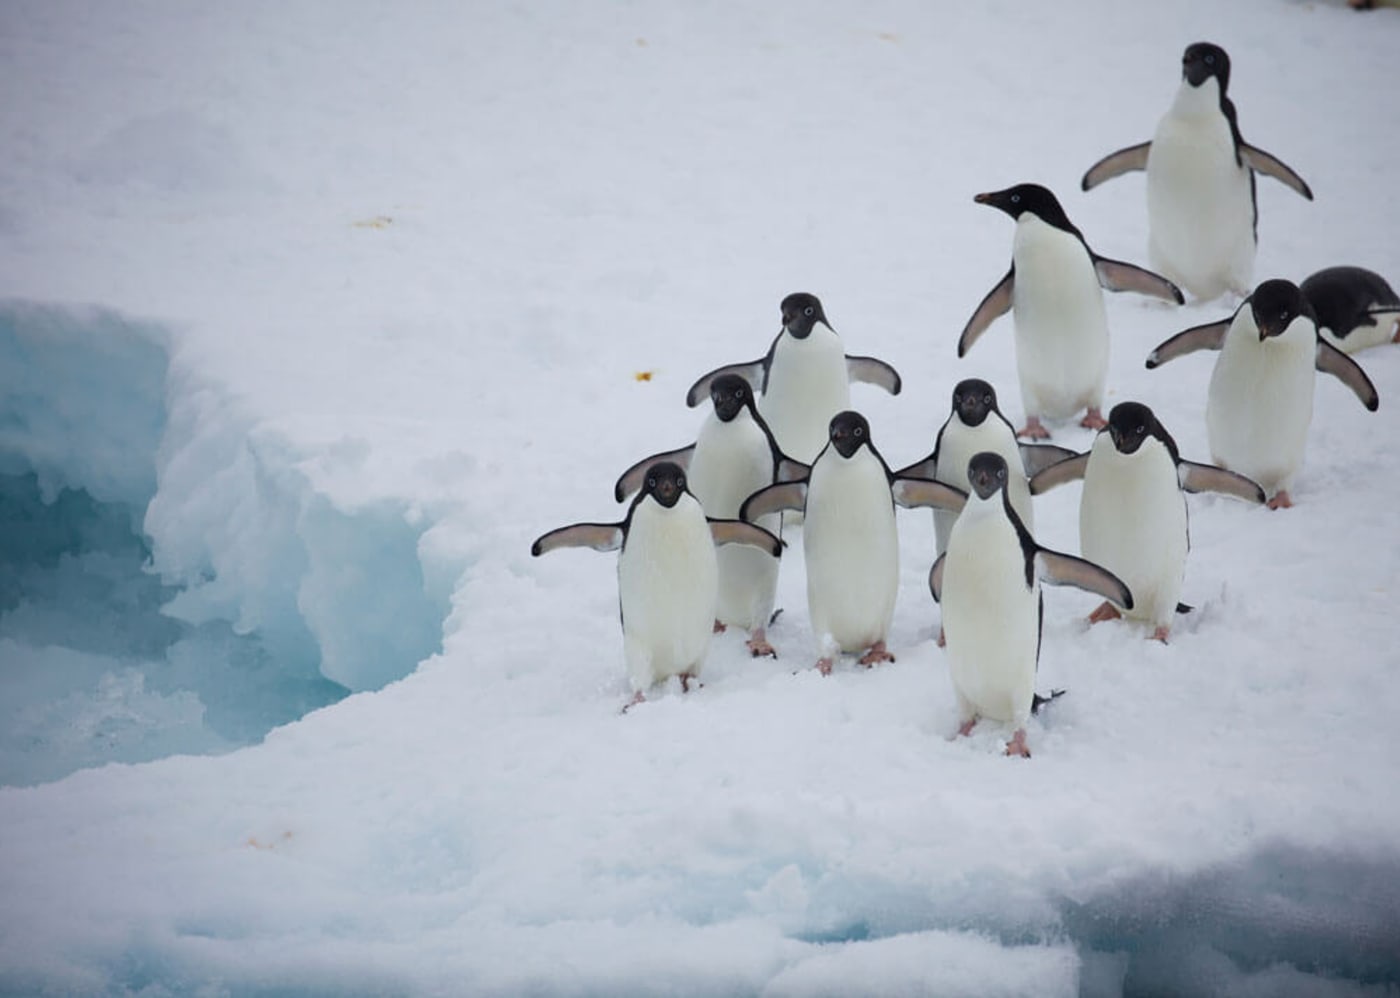 Group of Adelie penguins on ice